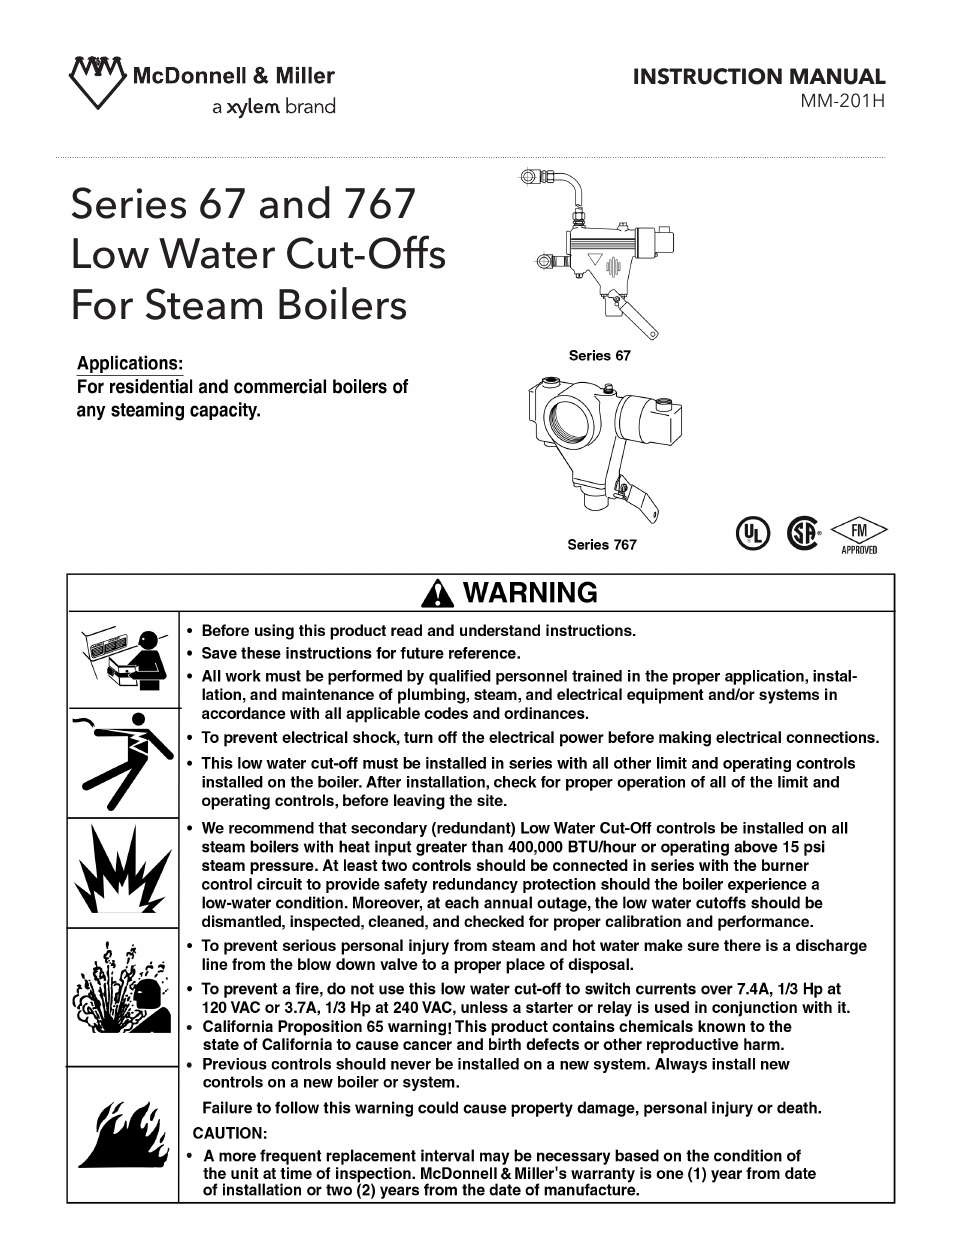 MM 201H Series 67 and 767 Low Water Cut-Offs For Steam Boilers